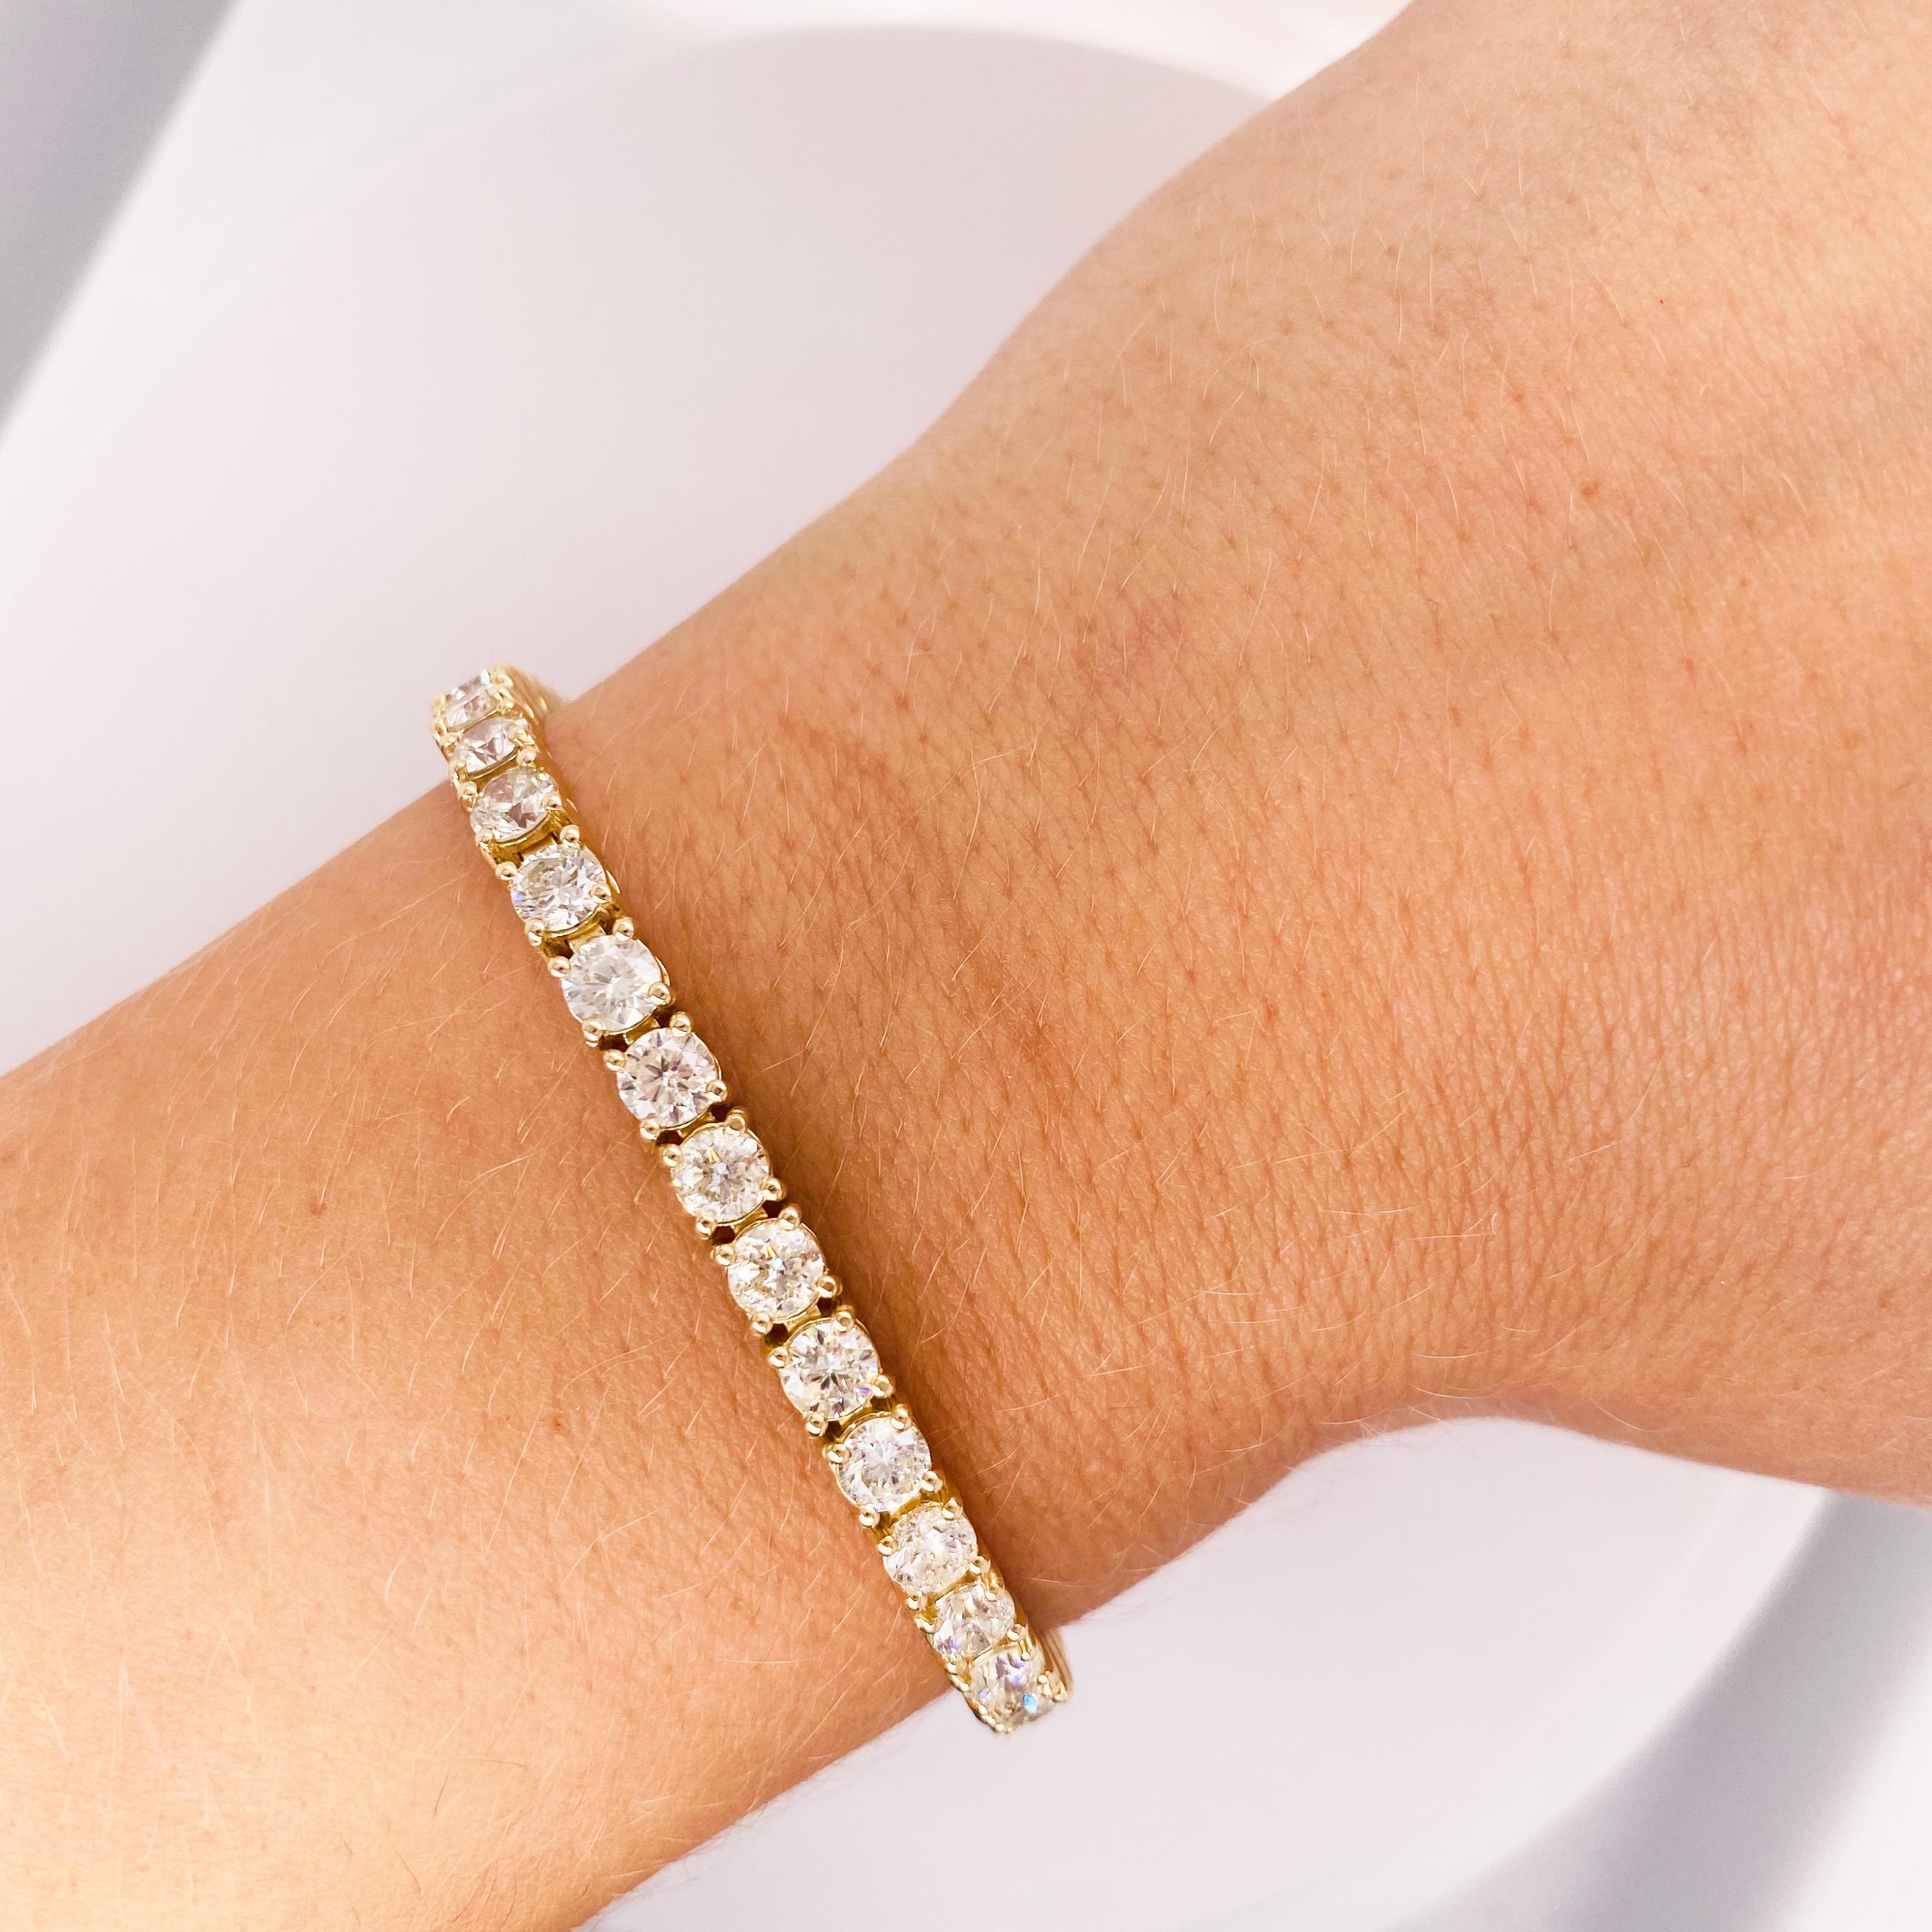 This 10 carat total weight 14K Yellow Gold TENNIS BRACELET is the perfect bracelet to go with your jewelry wardrobe. The huge diamonds are gorgeous quality, SI1 clarity and H/I color. You will love, love this bracelet!
